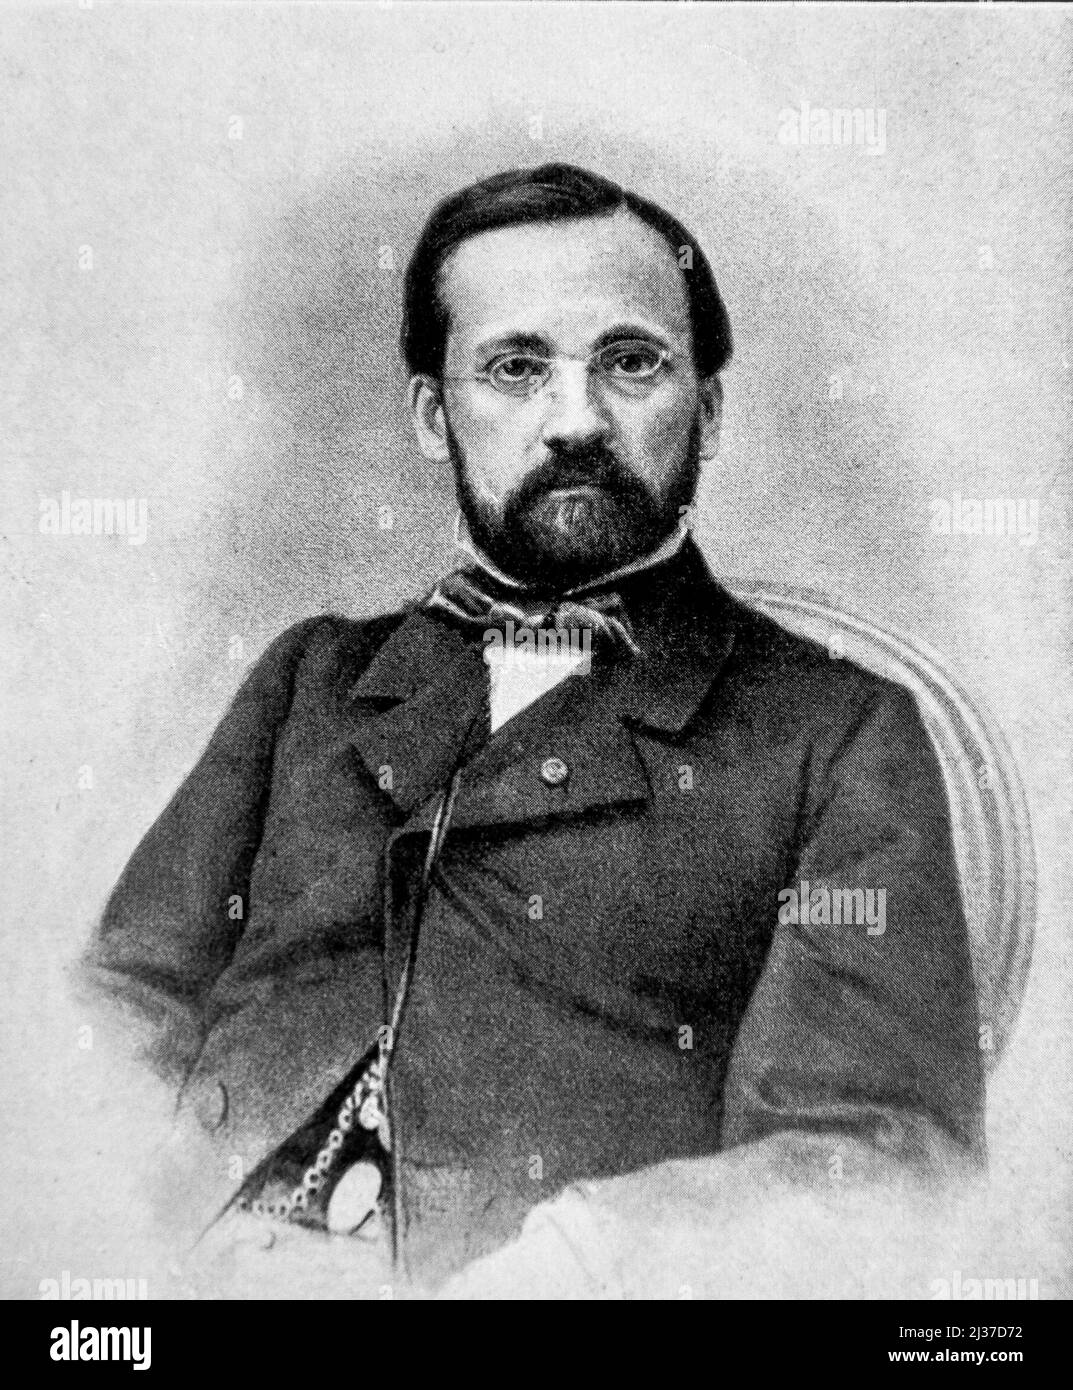 Louis Pasteur (December 27, 1822 â€“ September 28, 1895) was a French biologist, microbiologist, and chemist renowned for his discoveries of the Stock Photo